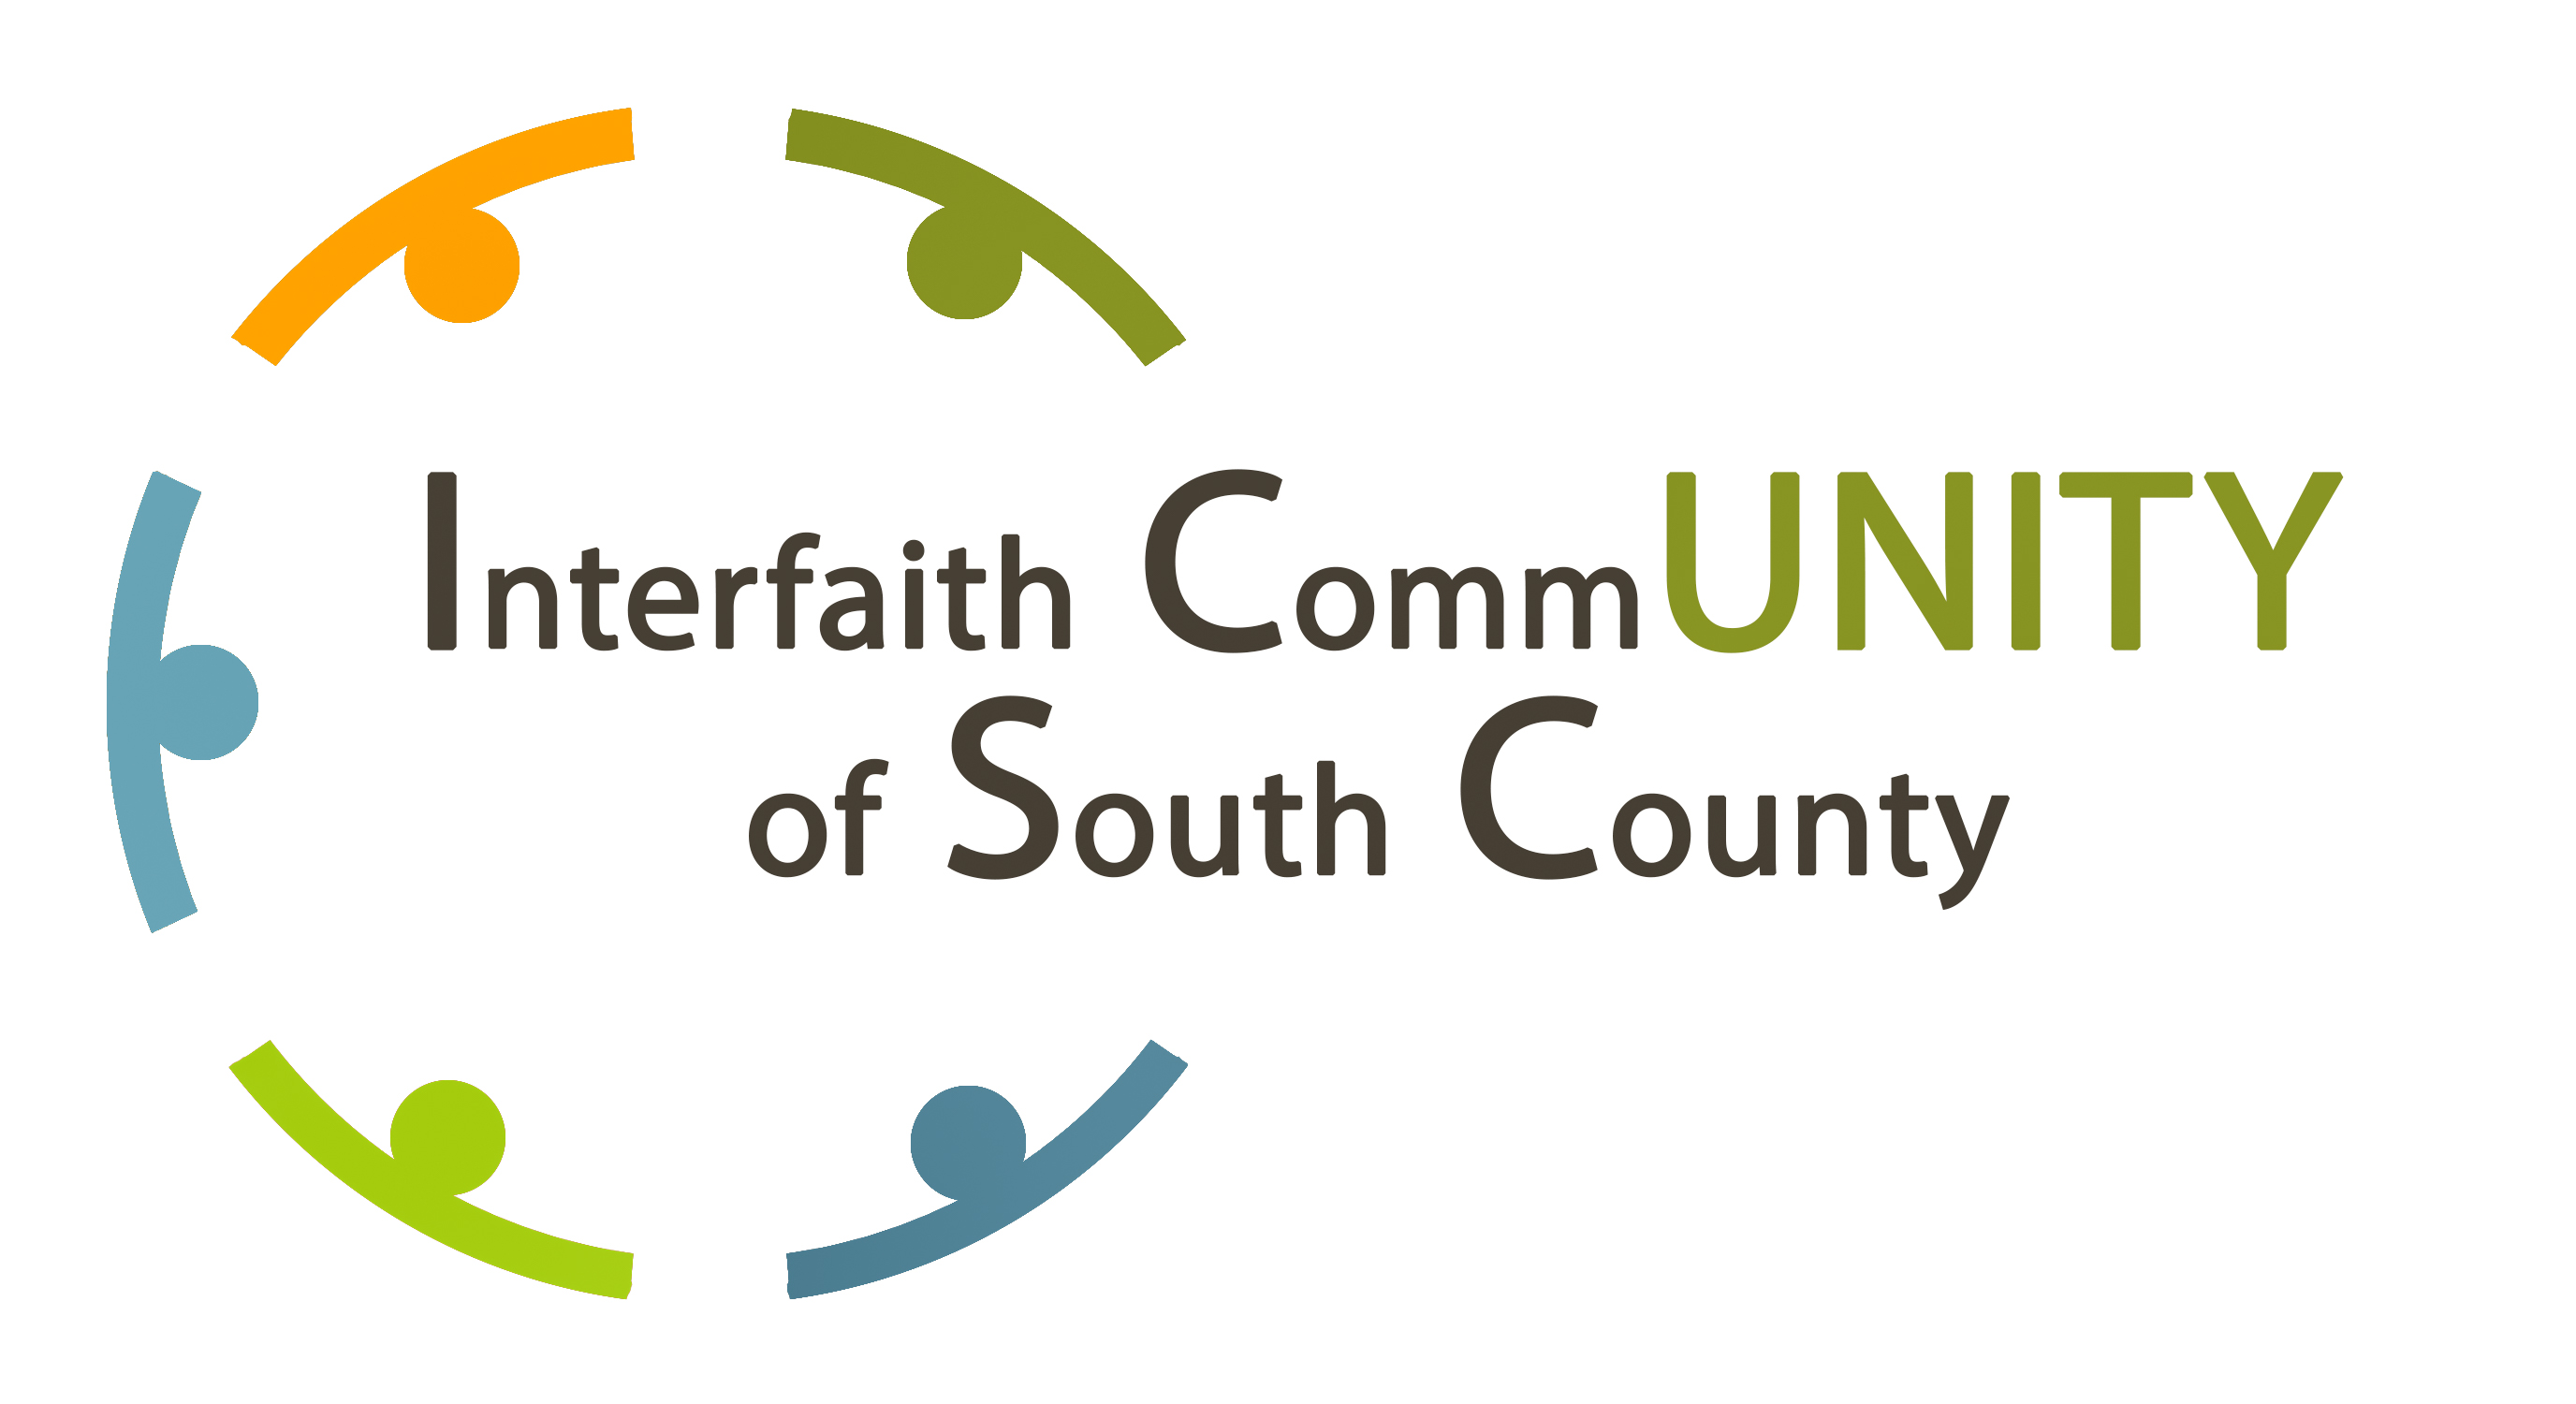 Interfaith Community of South County